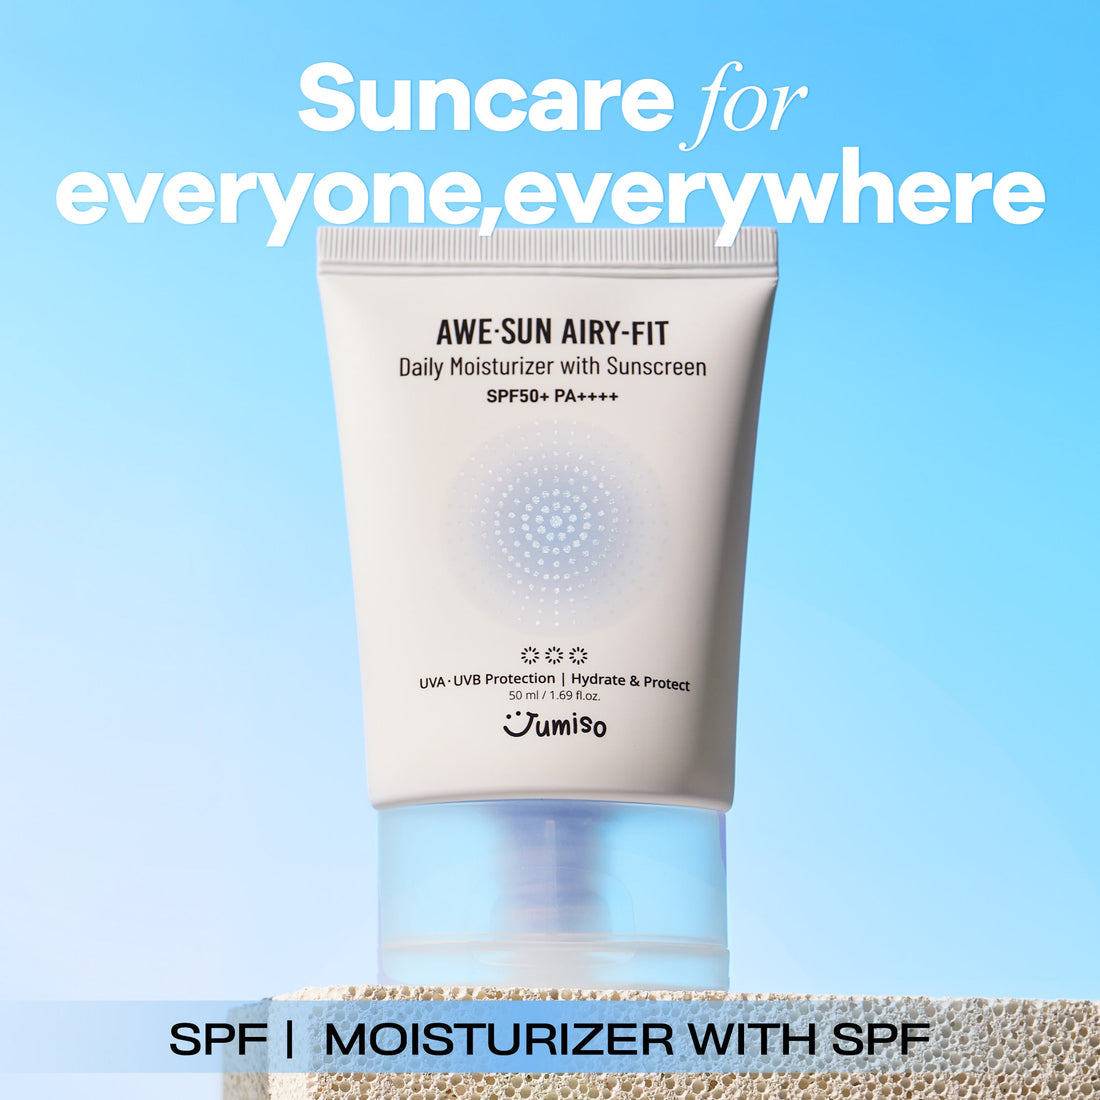 [BOGO] AWE⋅SUN AIRY-FIT Daily Moisturizer with Sunscreen SPF50+ PA++++ 50ml